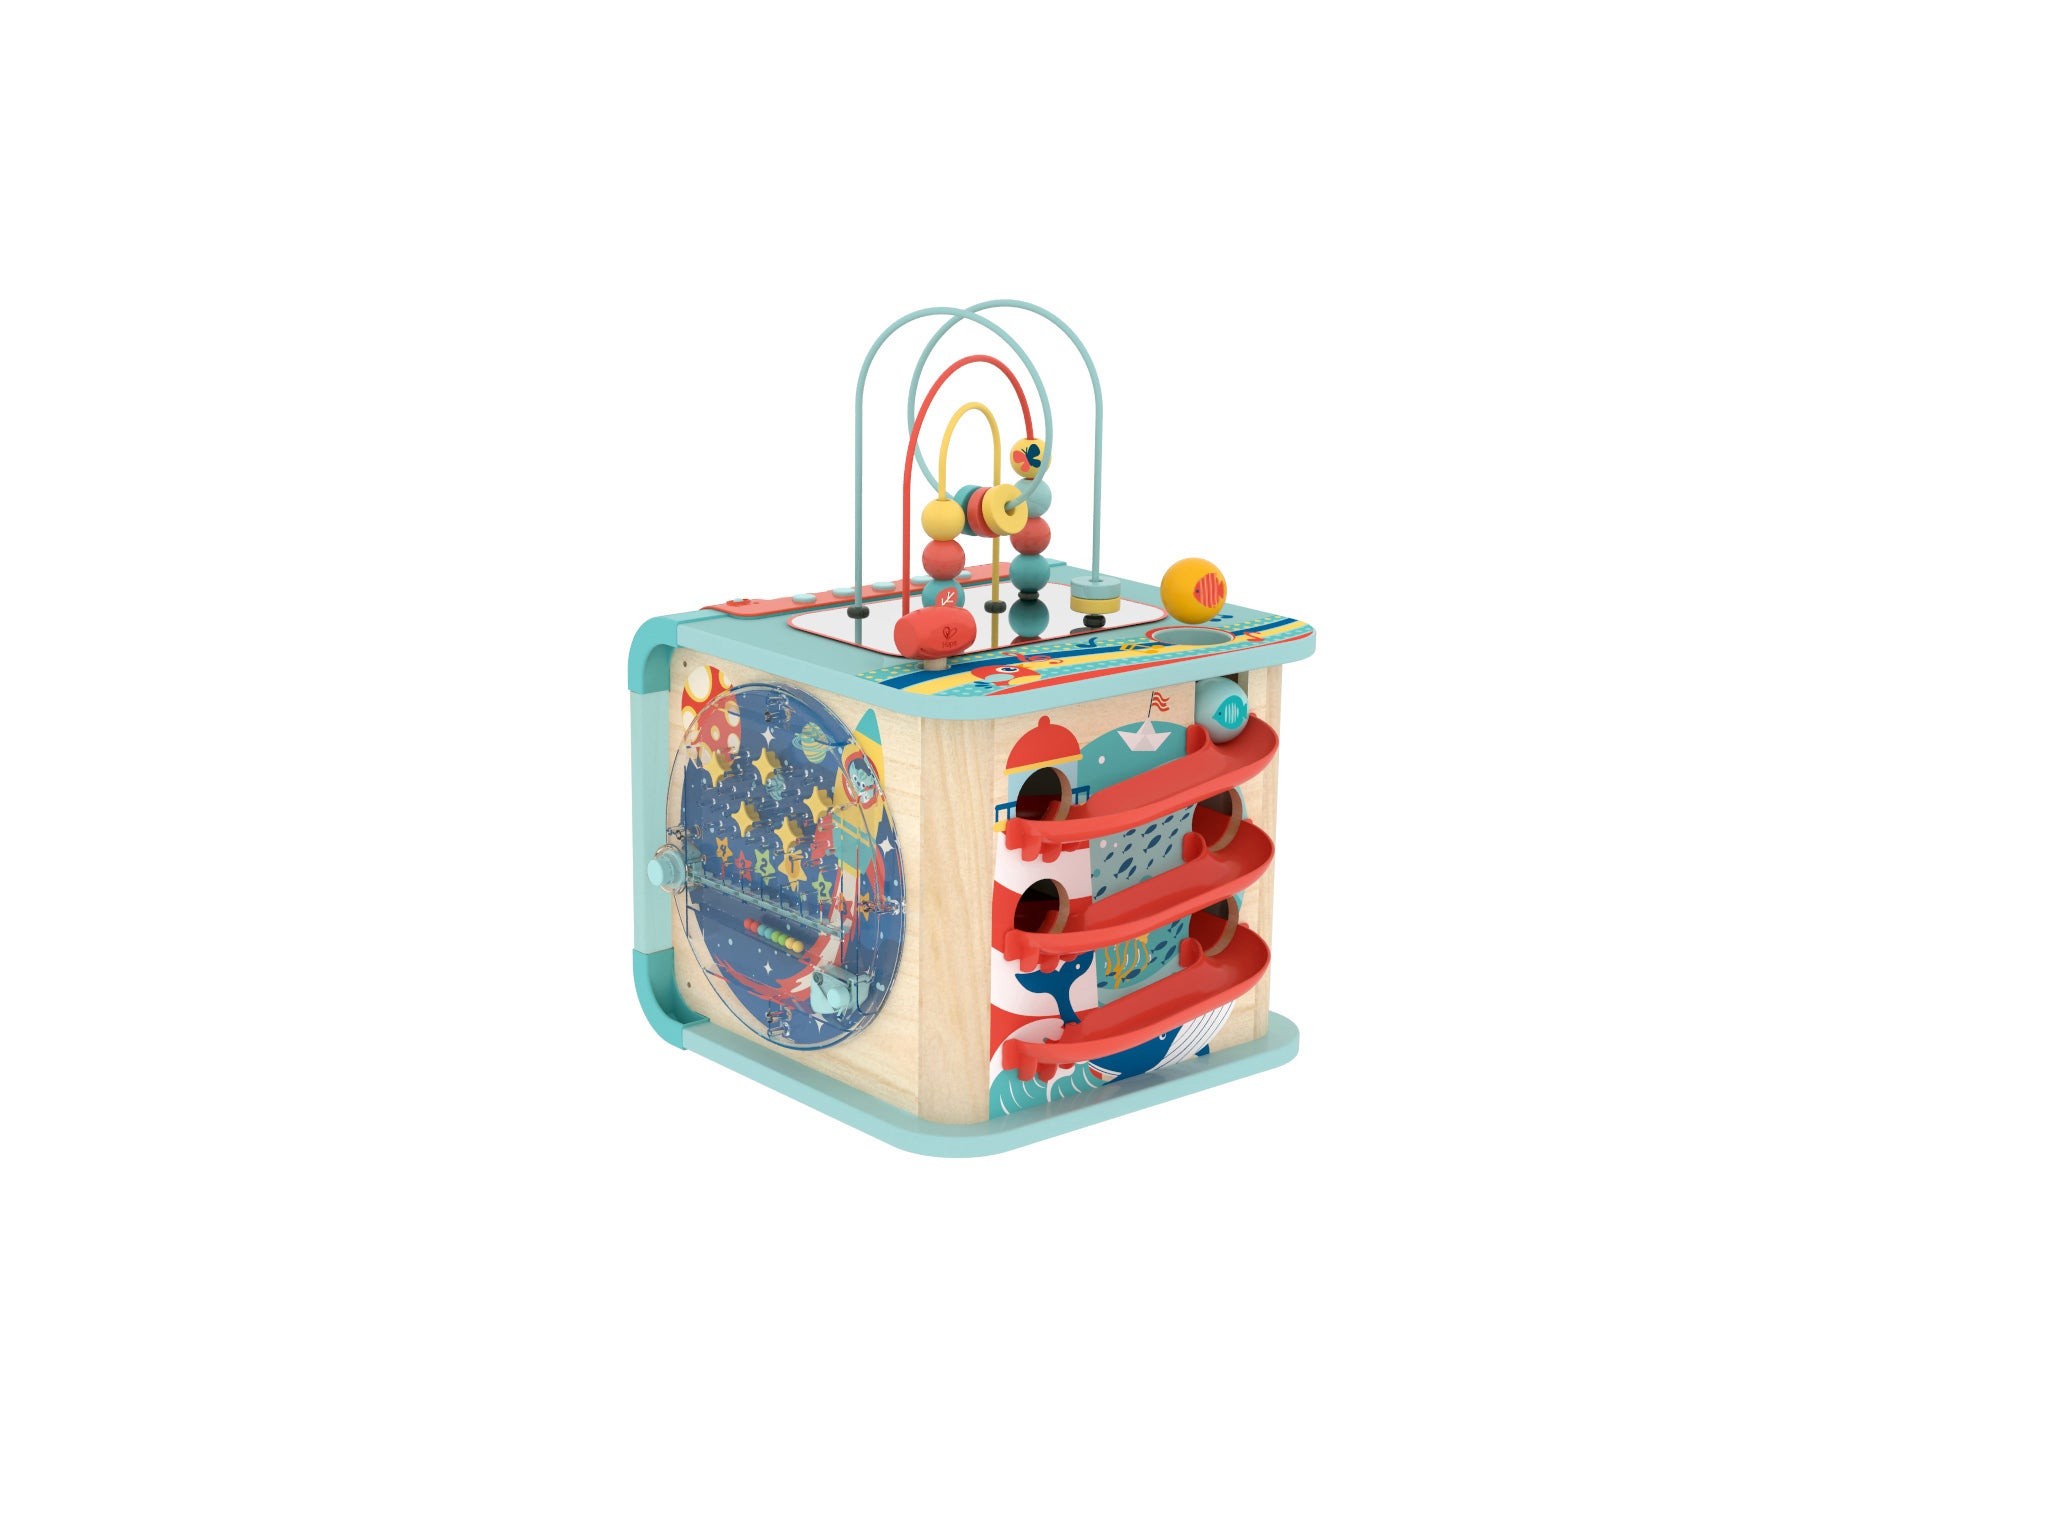 Explore & Learn Magic Cube Ages 12+ Months